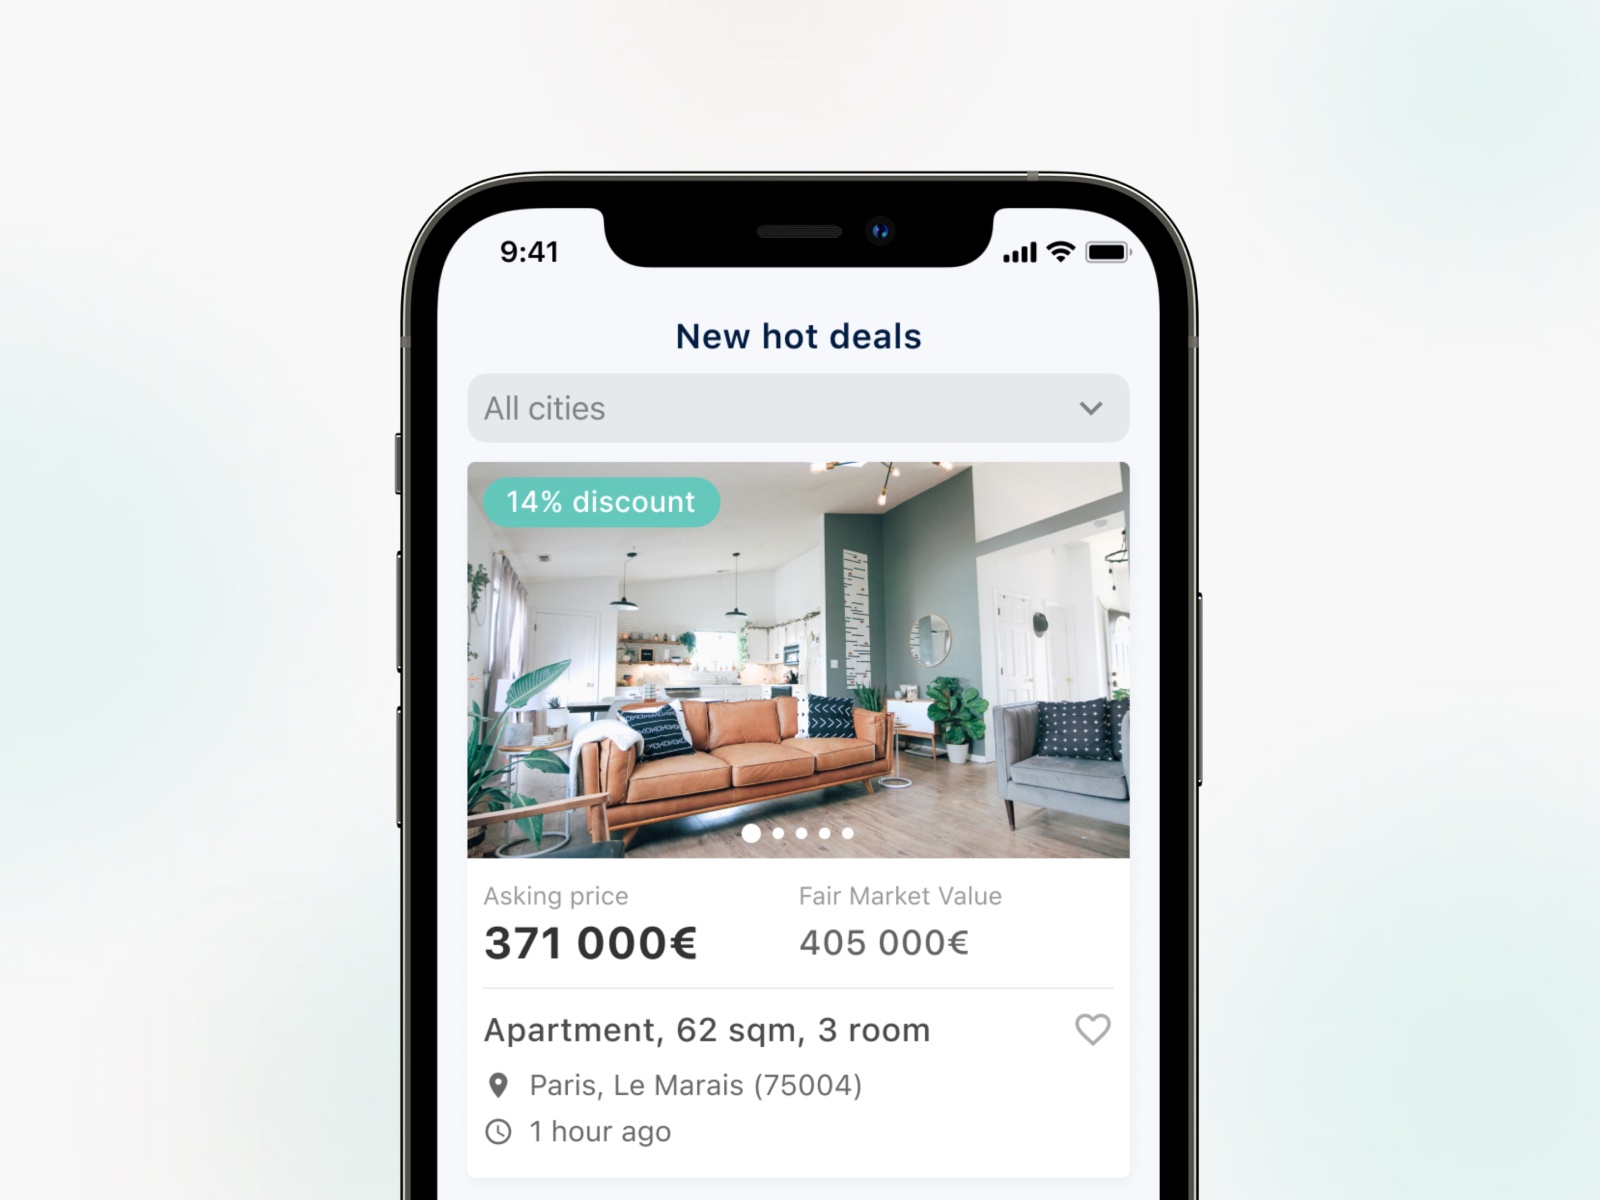 DoorFeed Raises €7M For Its Platform Allowing Large-Scale Investors To Acquire Family Homes